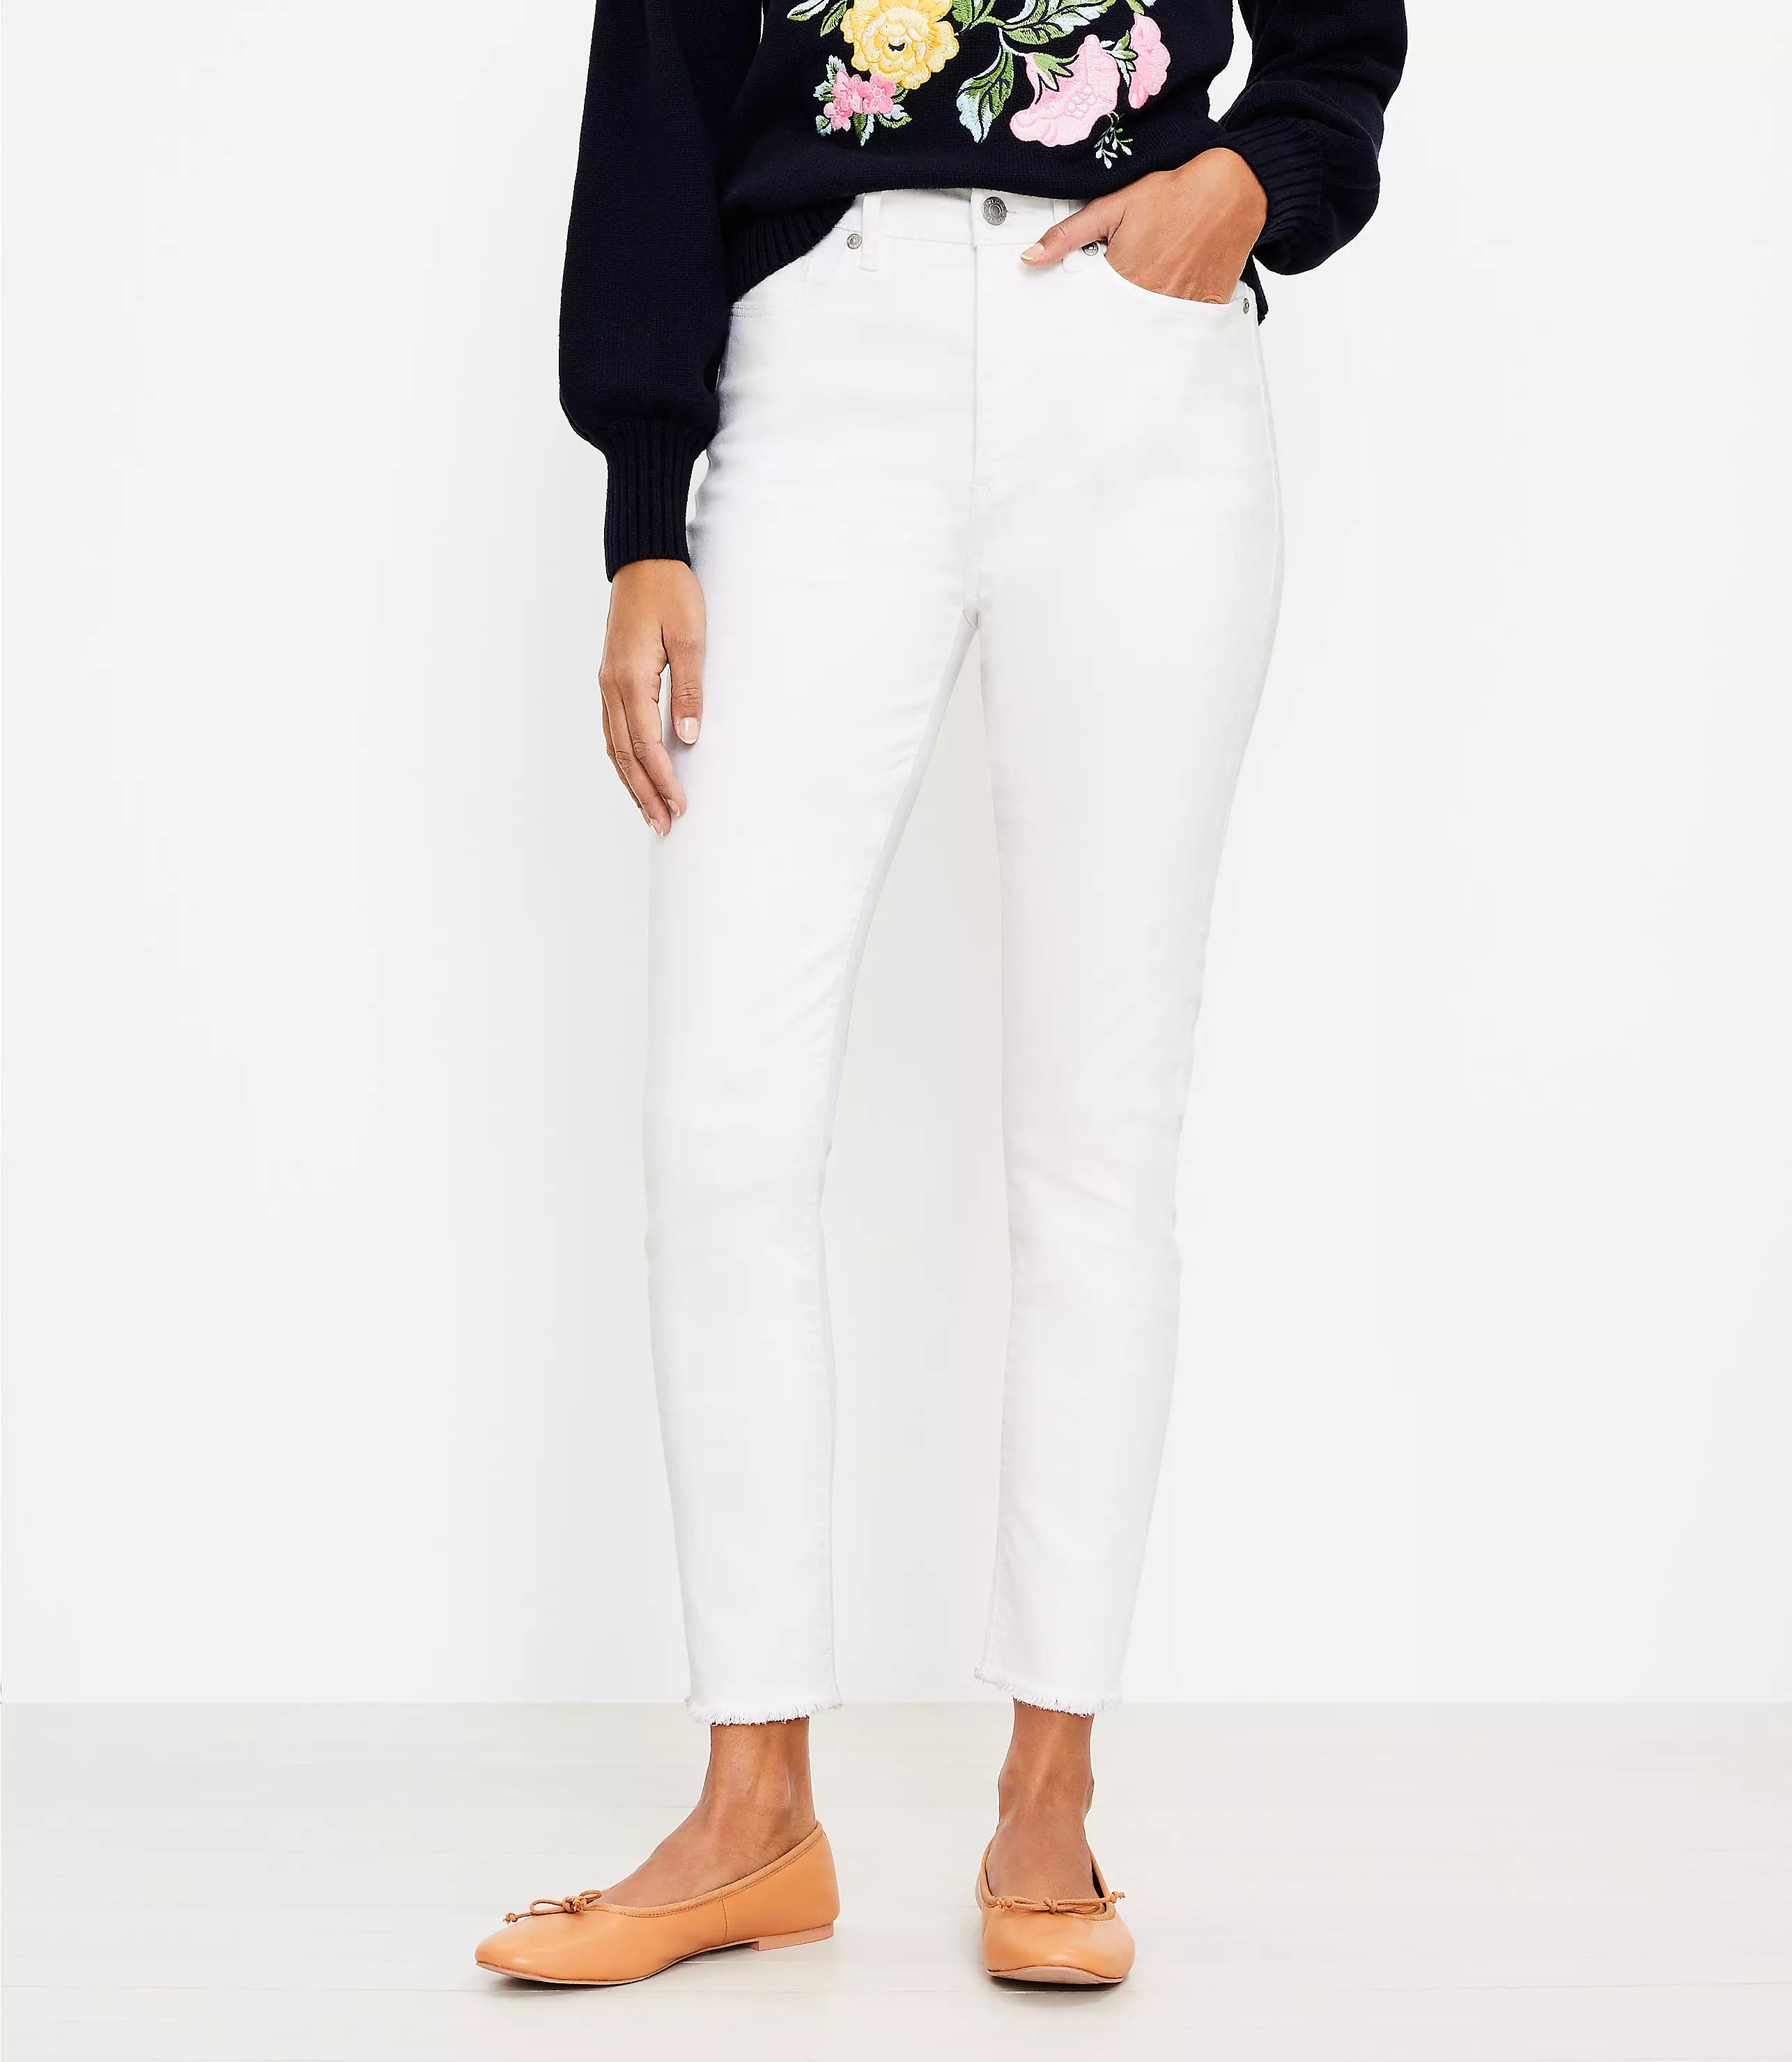 Petite Frayed High Rise Skinny Jeans in White | LOFT